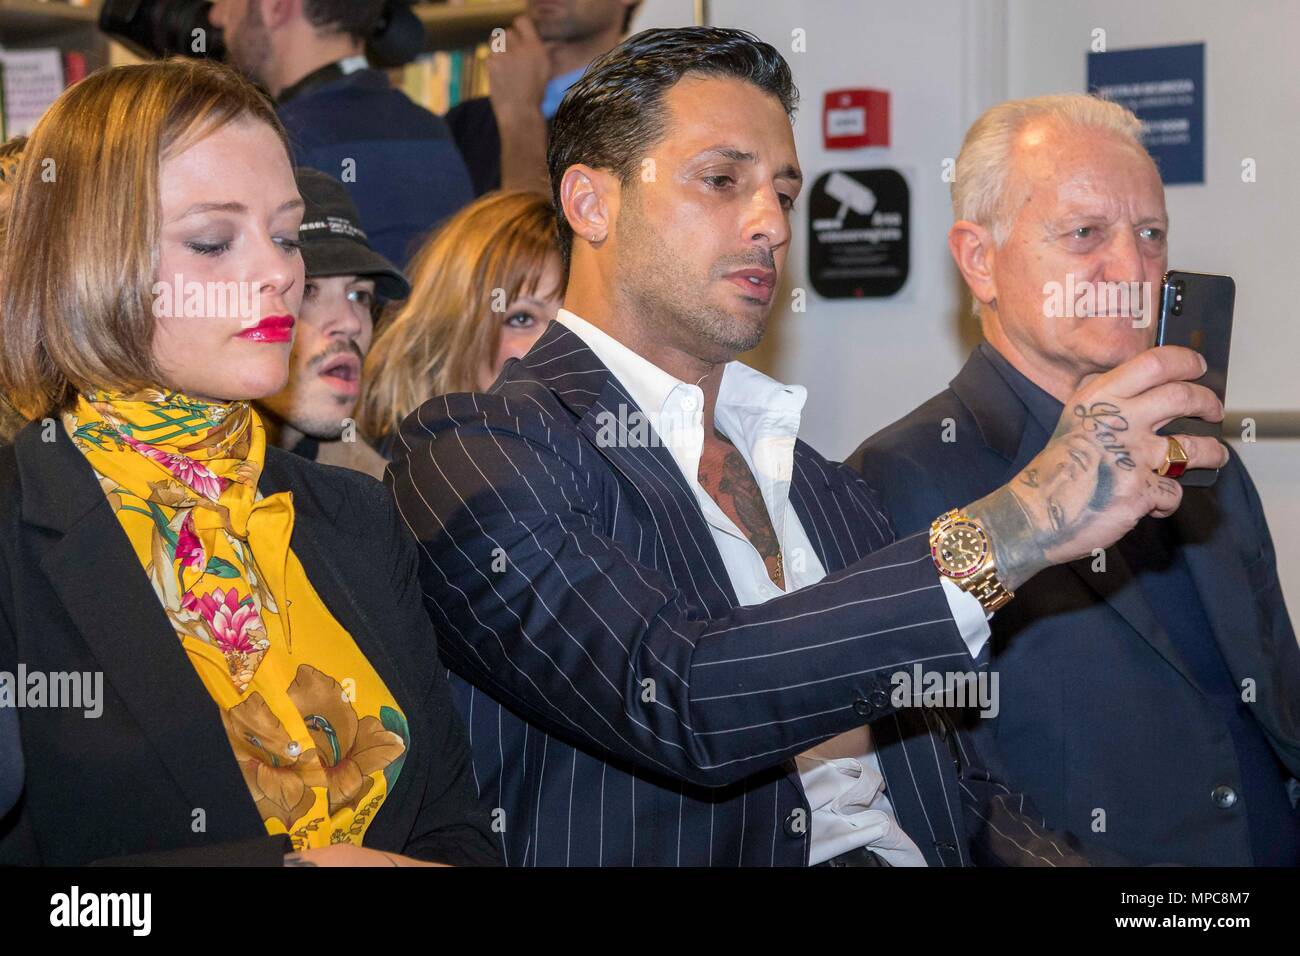 Milan, Italy. 22nd May, 2018. Fabrizio Corona and Vip at the presentation  of the book by Gabriele Parpiglia "#laportadelcuore" in the picture:  Fabrizio Corona Santo Versace Le Donatella Credit: Independent Photo  Agency/Alamy